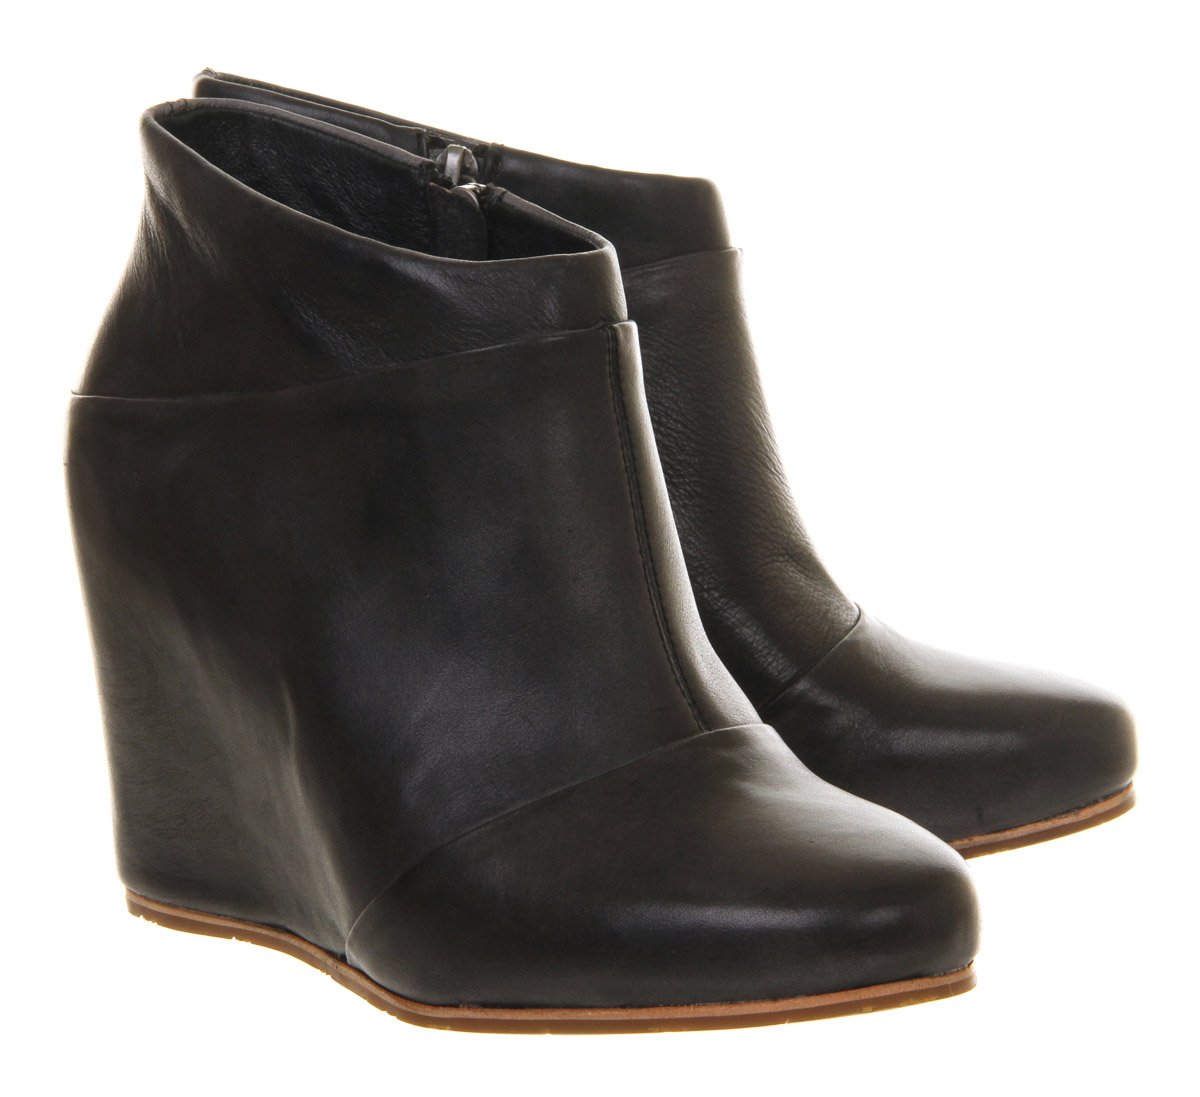 Ugg Carmine Leather Wedge Ankle Boots in Black | Lyst